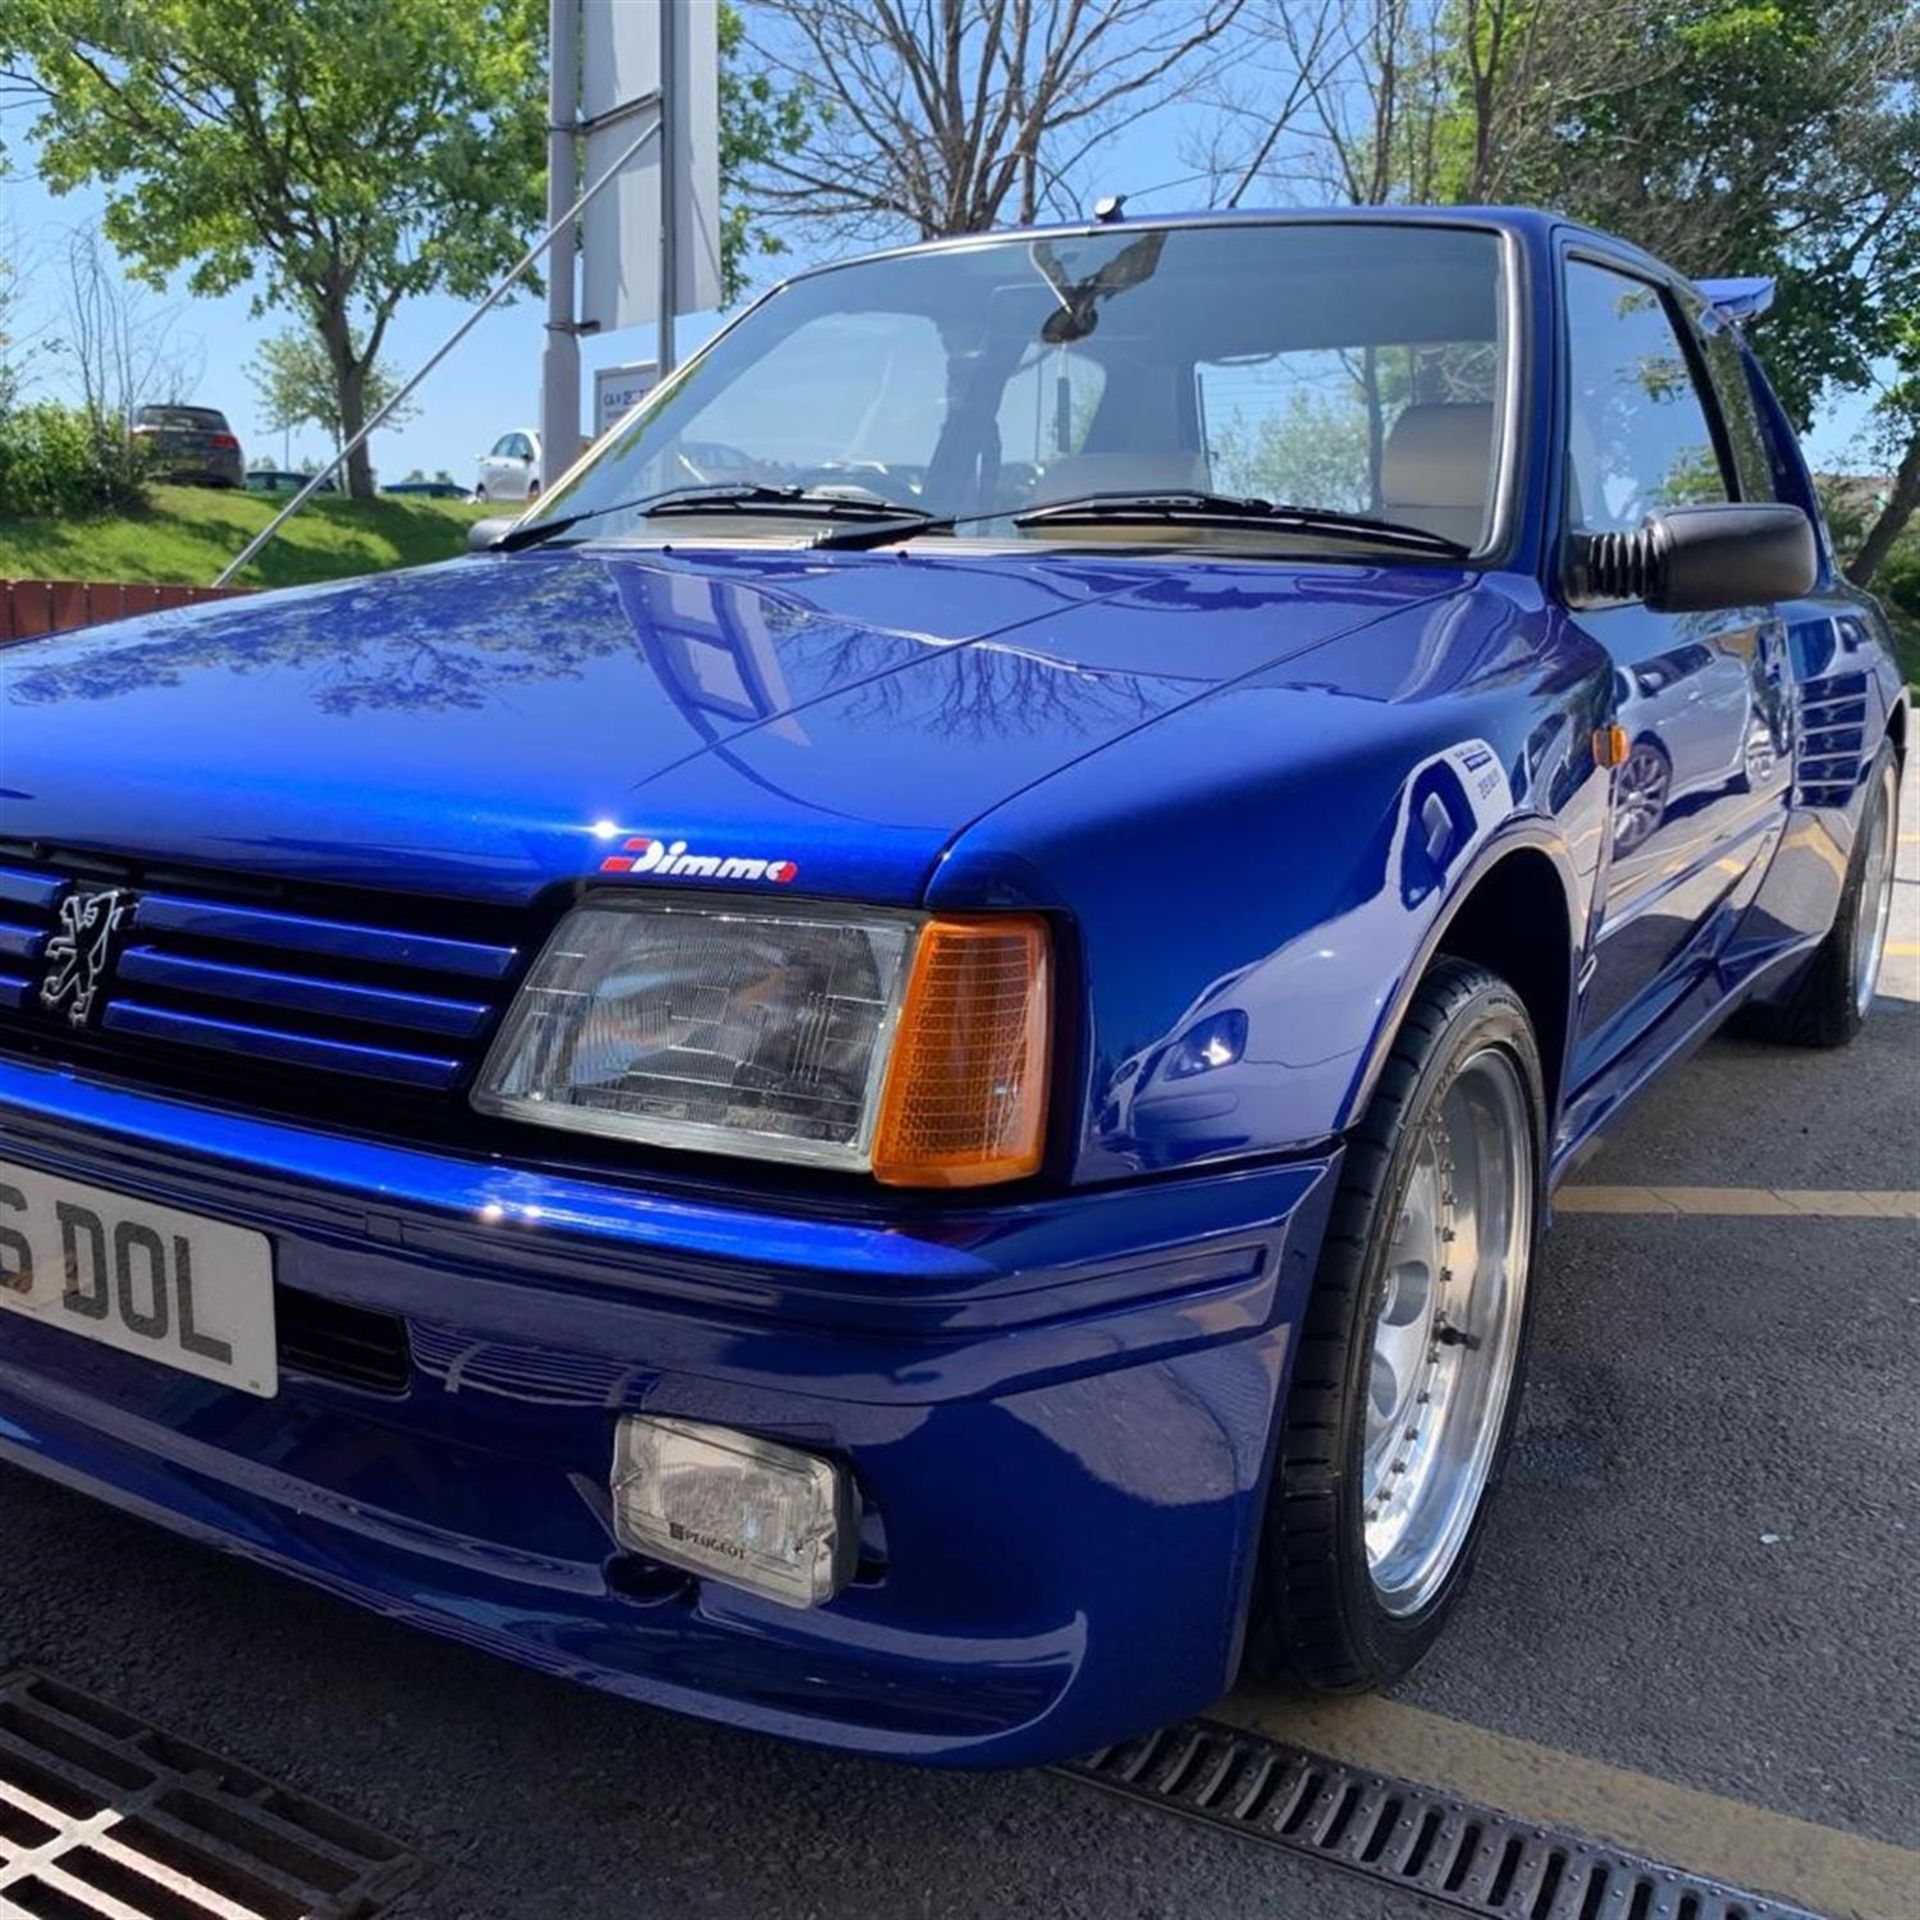 1988 Peugeot 205 1.9 GTI Dimma - Image 2 of 13